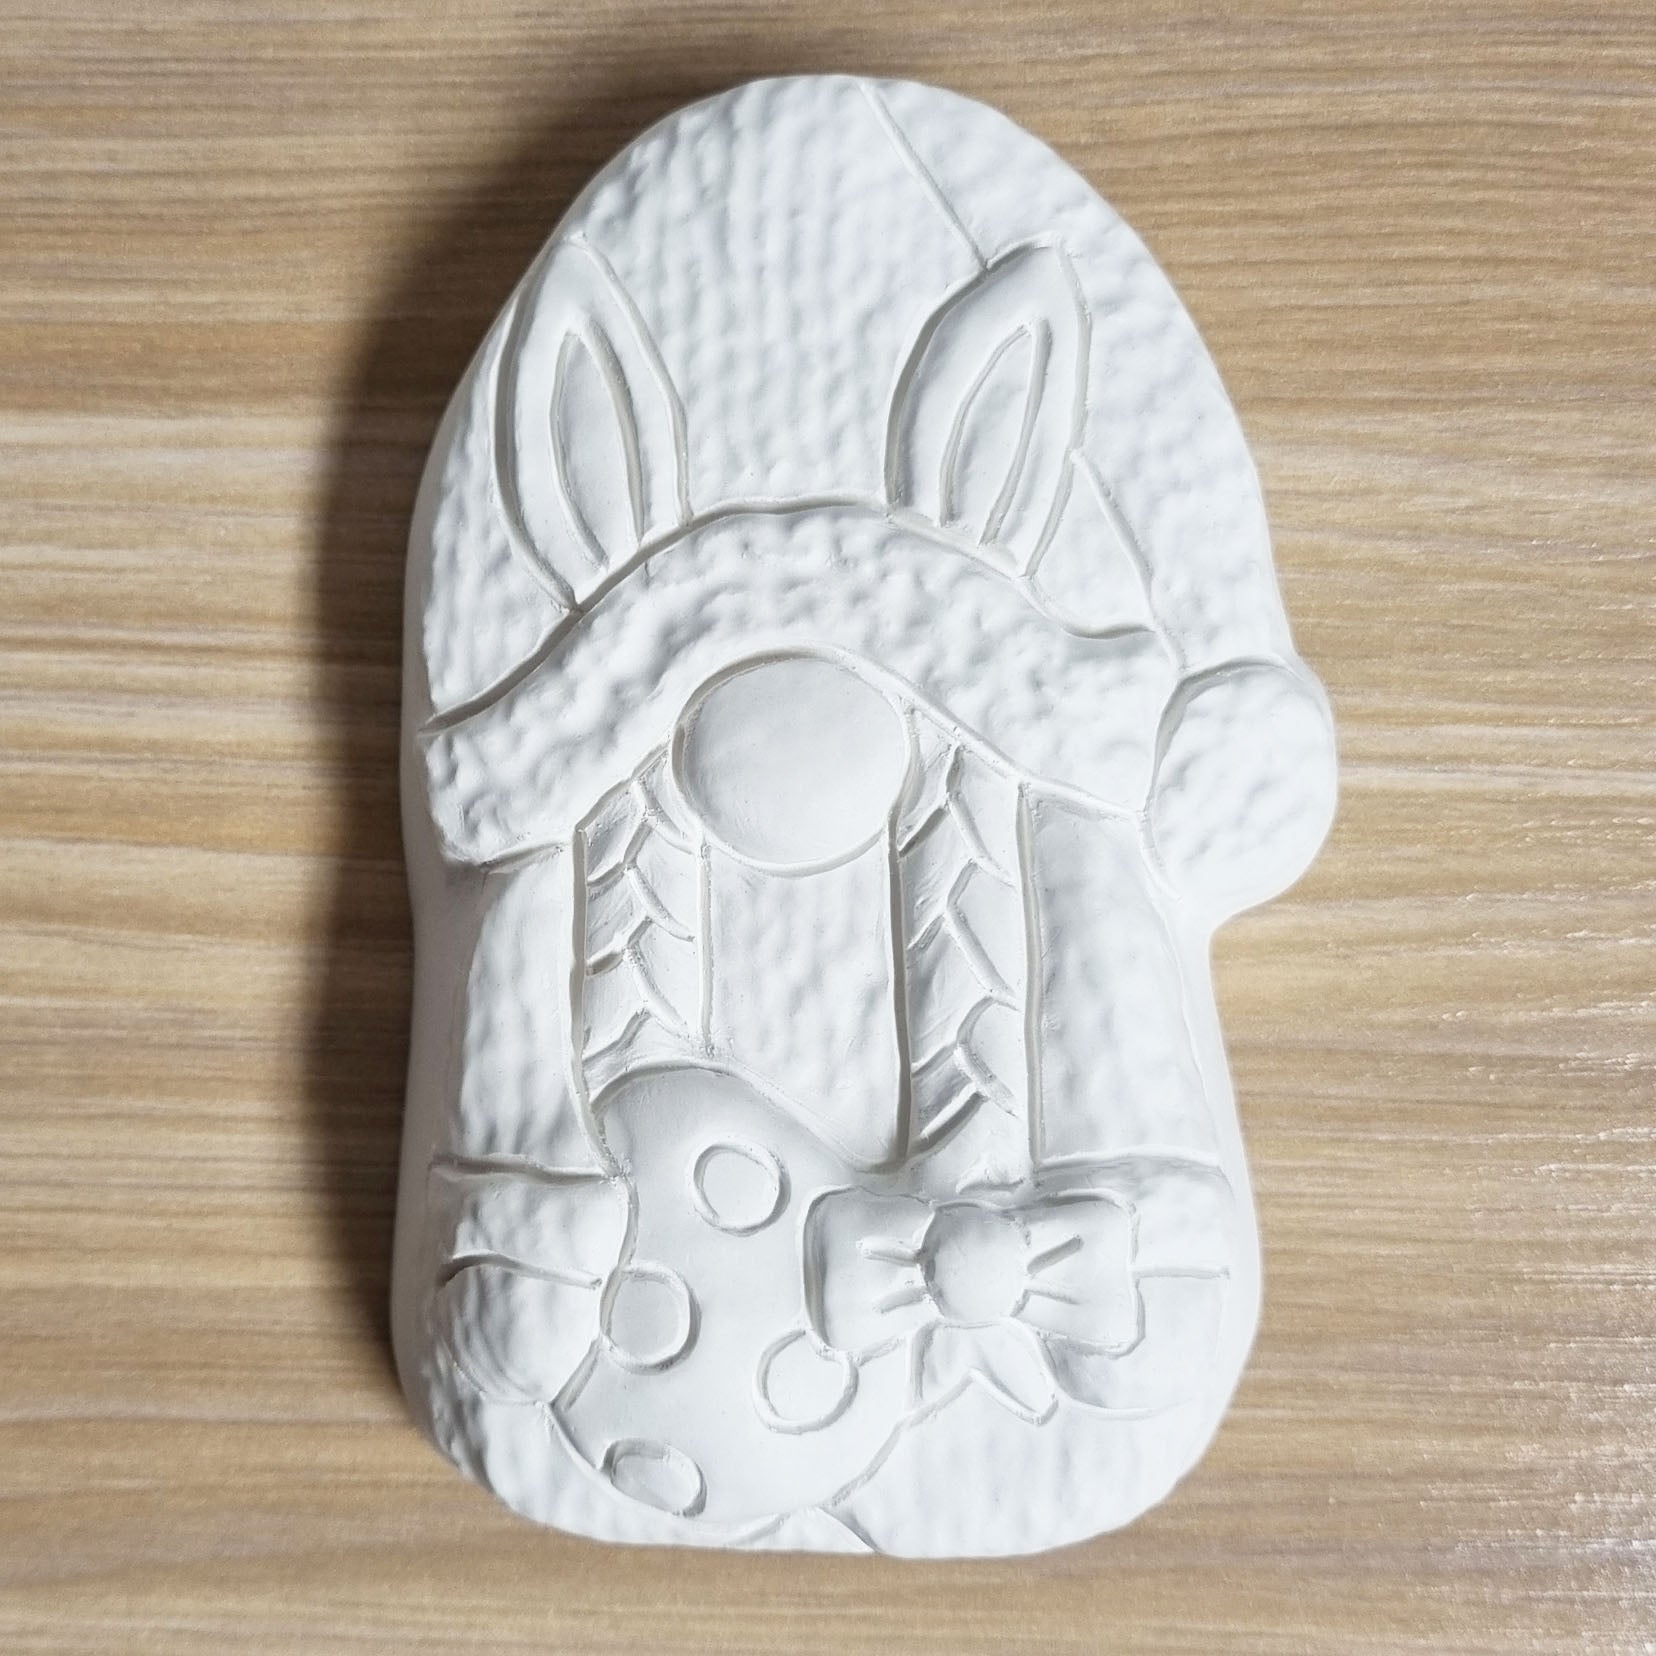 Easter Gonkess Mould | Truly Personal | Bath Bomb, Soap, Resin, Chocolate, Jelly, Wax Melts Mold